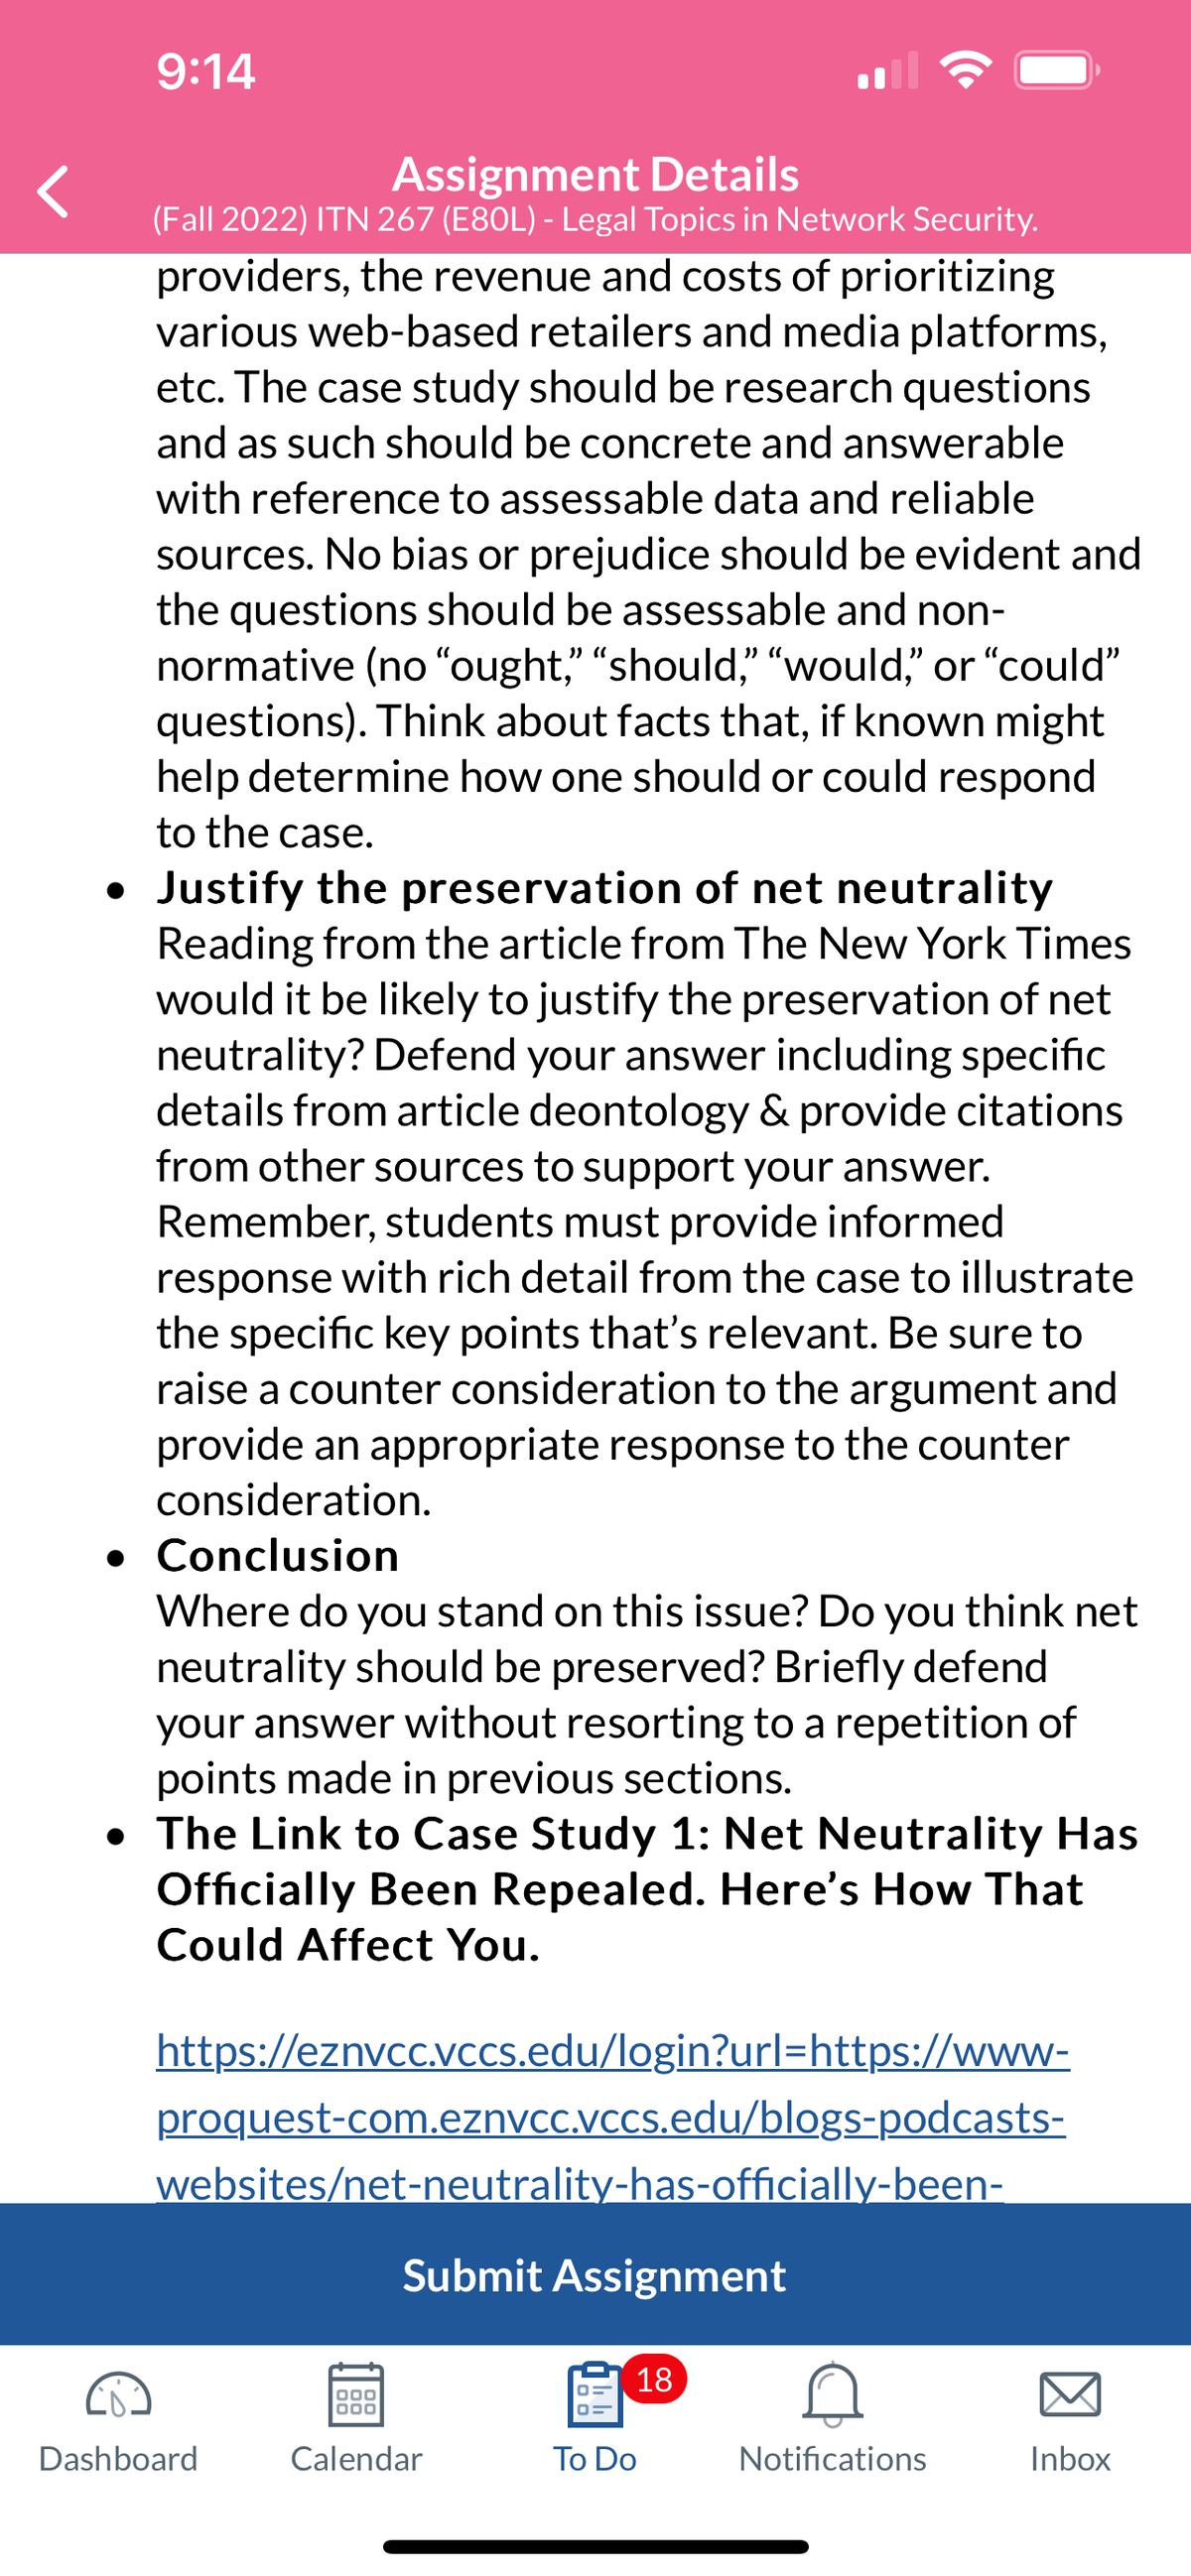 9:14
Assignment Details
(Fall 2022) ITN 267 (E80L) - Legal Topics in Network Security.
providers, the revenue and costs of prioritizing
various web-based retailers and media platforms,
etc. The case study should be research questions
and as such should be concrete and answerable
with reference to assessable data and reliable
sources. No bias or prejudice should be evident and
the questions should be assessable and non-
normative (no "ought," "should," "would," or "could"
questions). Think about facts that, if known might
help determine how one should or could respond
to the case.
• Justify the preservation of net neutrality
Reading from the article from The New York Times
would it be likely to justify the preservation of net
neutrality? Defend your answer including specific
details from article deontology & provide citations
from other sources to support your answer.
Remember, students must provide informed
response with rich detail from the case to illustrate
the specific key points that's relevant. Be sure to
raise a counter consideration to the argument and
provide an appropriate response to the counter
consideration.
. Conclusion
Where do you stand on this issue? Do you think net
neutrality should be preserved? Briefly defend
your answer without resorting to a repetition of
points made in previous sections.
• The Link to Case Study 1: Net Neutrality Has
Officially Been Repealed. Here's How That
Could Affect You.
https://eznvcc.vccs.edu/login?url=https://www-
proquest-com.eznvcc.vccs.edu/blogs-podcasts-
websites/net-neutrality-has-officially-been-
Dashboard
Submit Assignment
000
000
Calendar
18
To Do
Notifications
Inbox